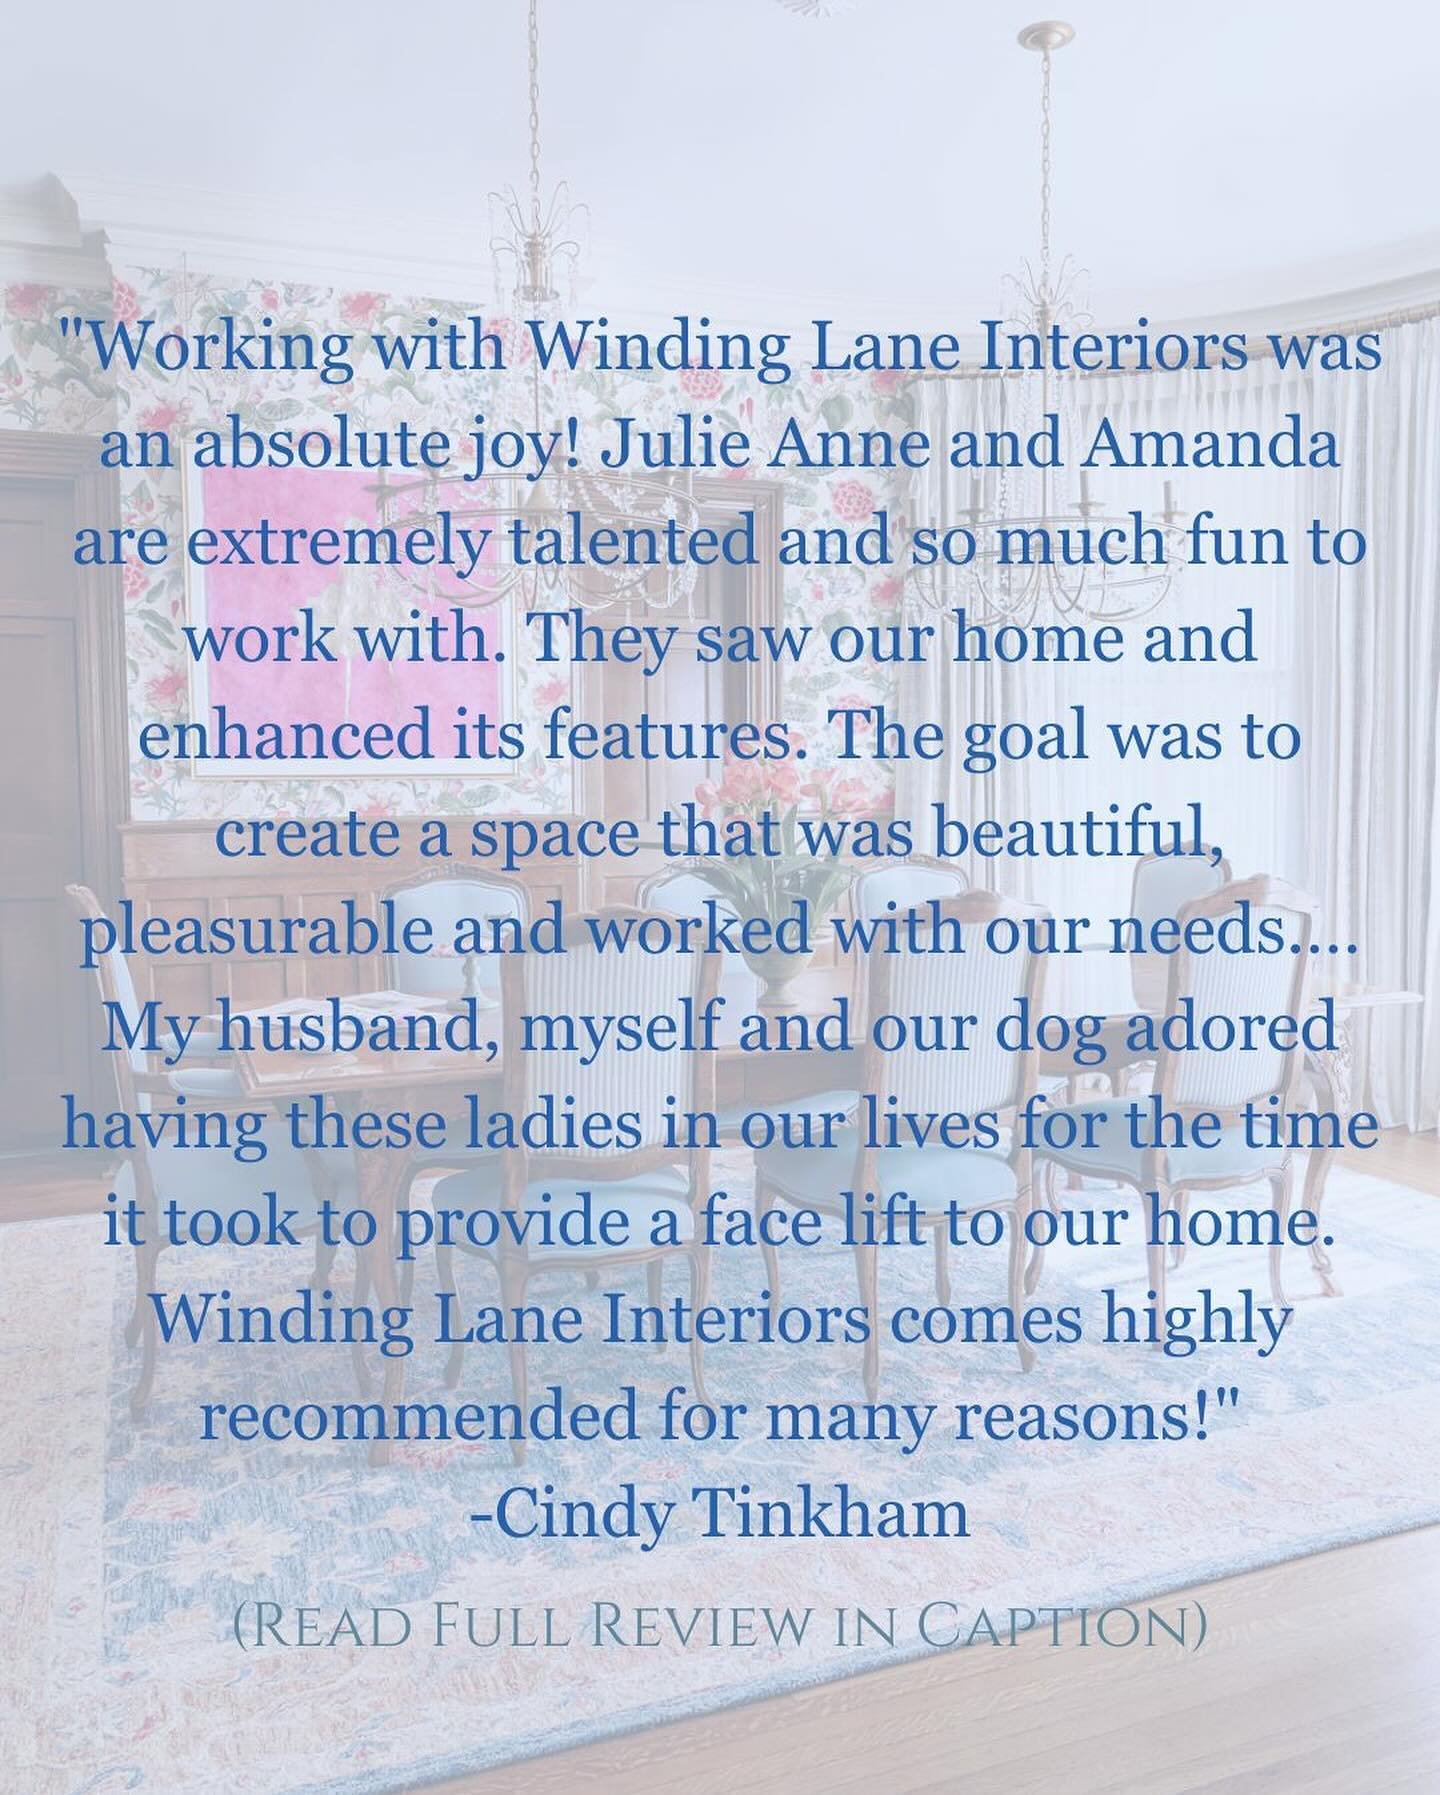 Thank you Cindy and Jim (and darling Emery!) It was our joy and privilege to honor your beautiful Historic home and make it a comfortable place for all three of you! 💗💕

&ldquo;Working with Winding Lane Interiors was an absolute joy! Julie Anne and